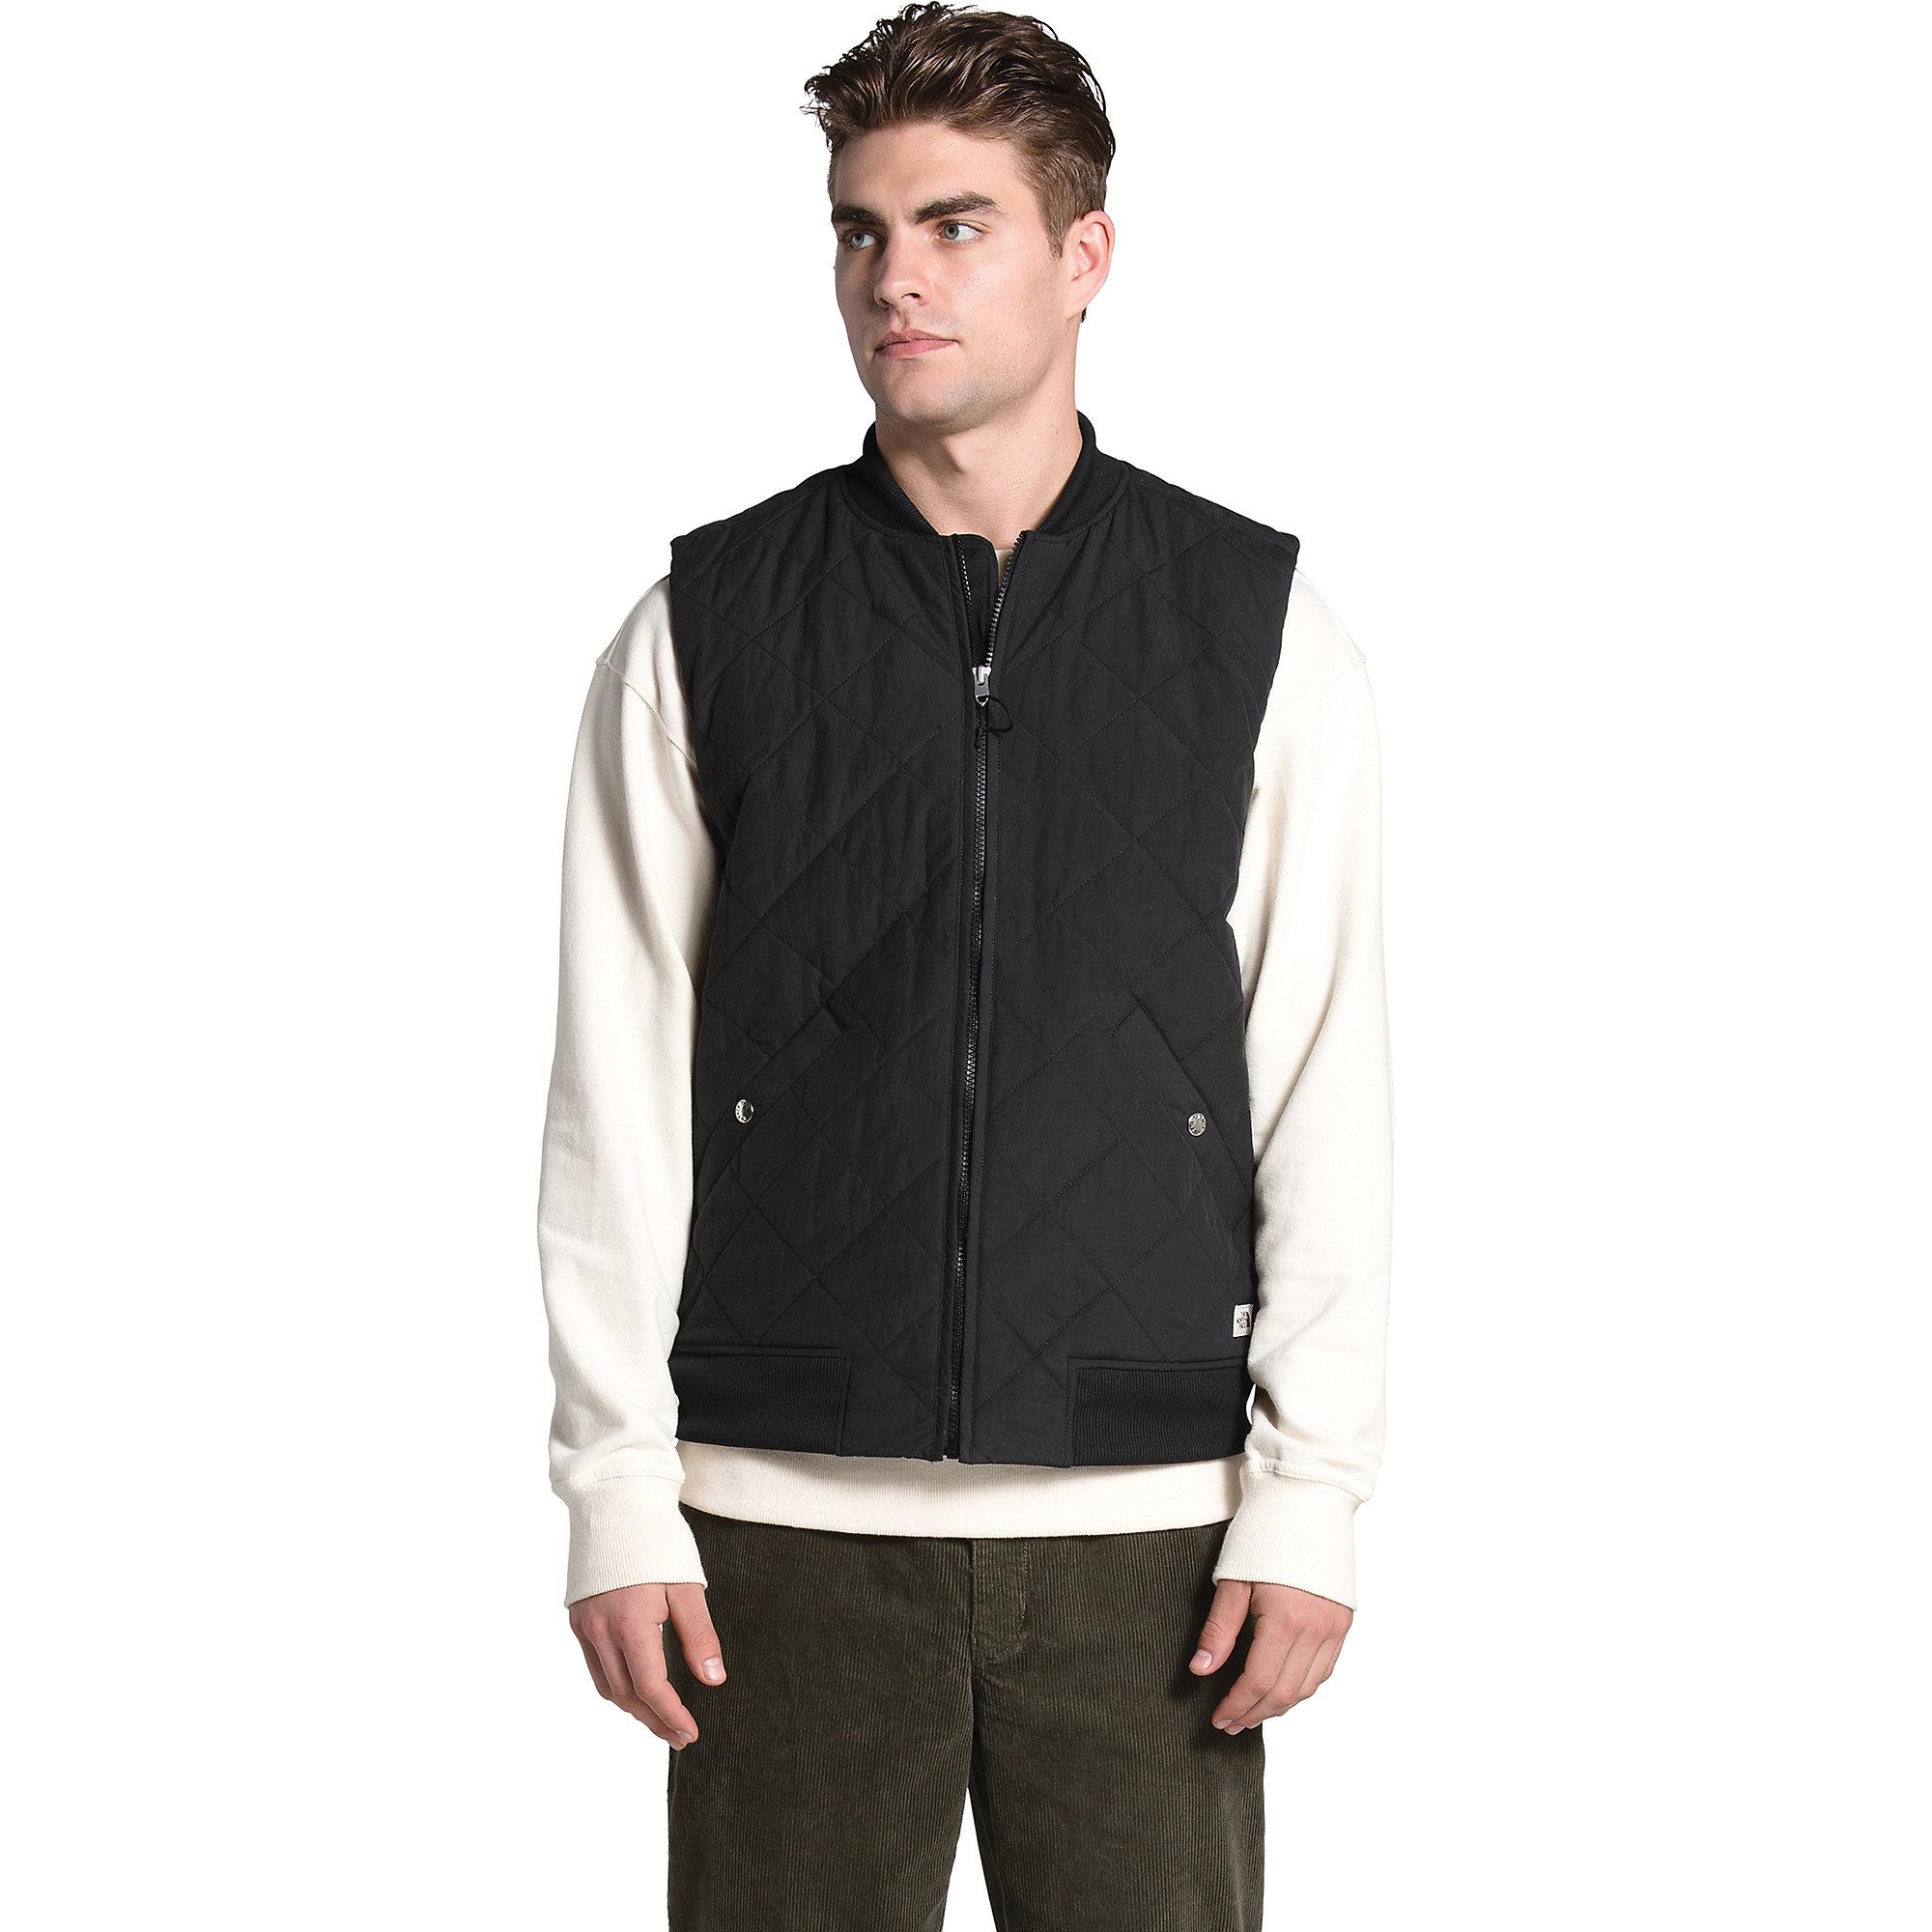 The North Face Synthetic Cuchillo Insulated Vest in Black for Men - Lyst